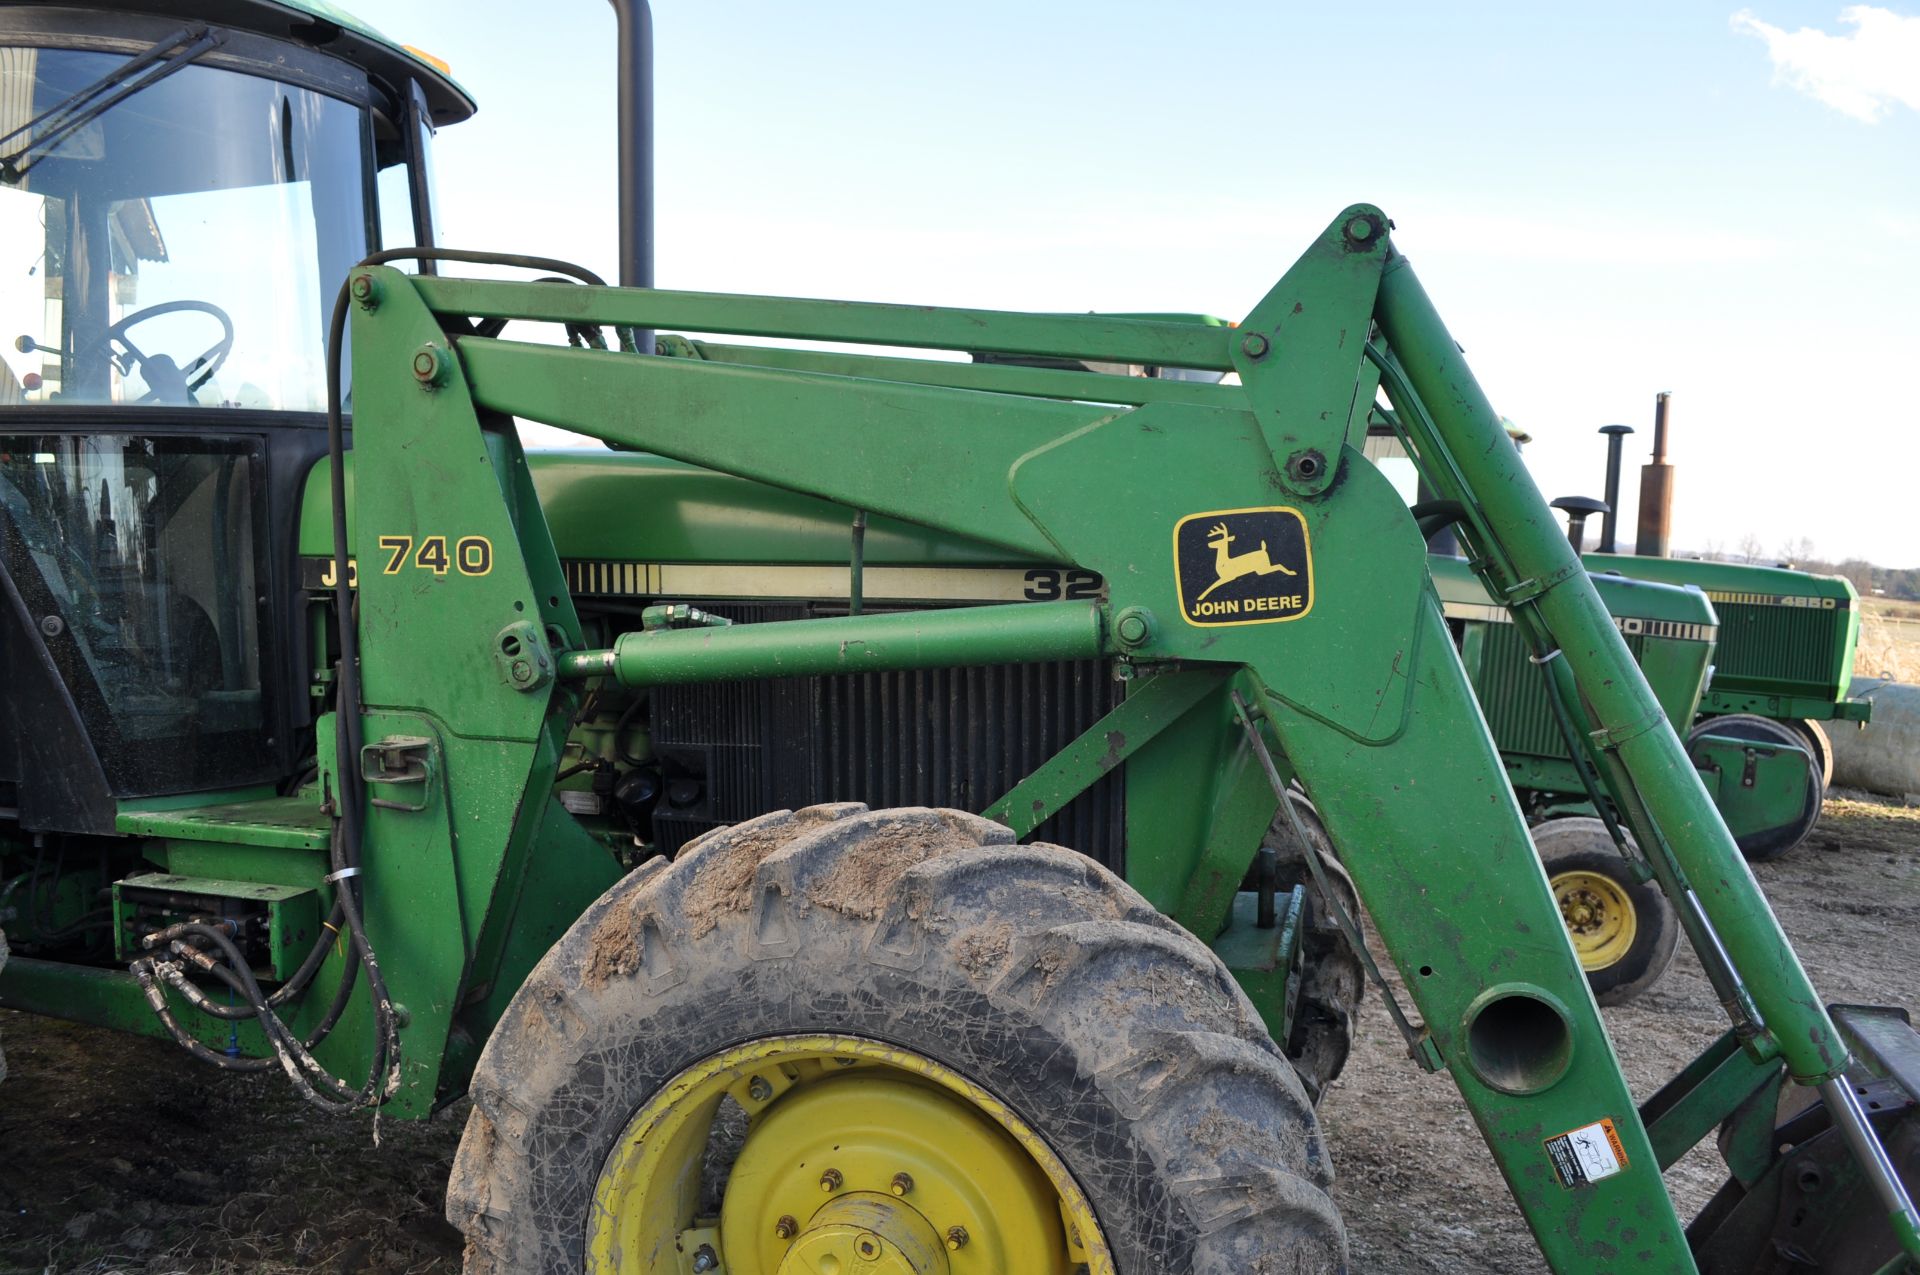 John Deere 3255 tractor, MFWD, C/H/A, 18.4-38 rear, 13.6-28 front, rear wheel weights, 2 hyd remotes - Image 17 of 28